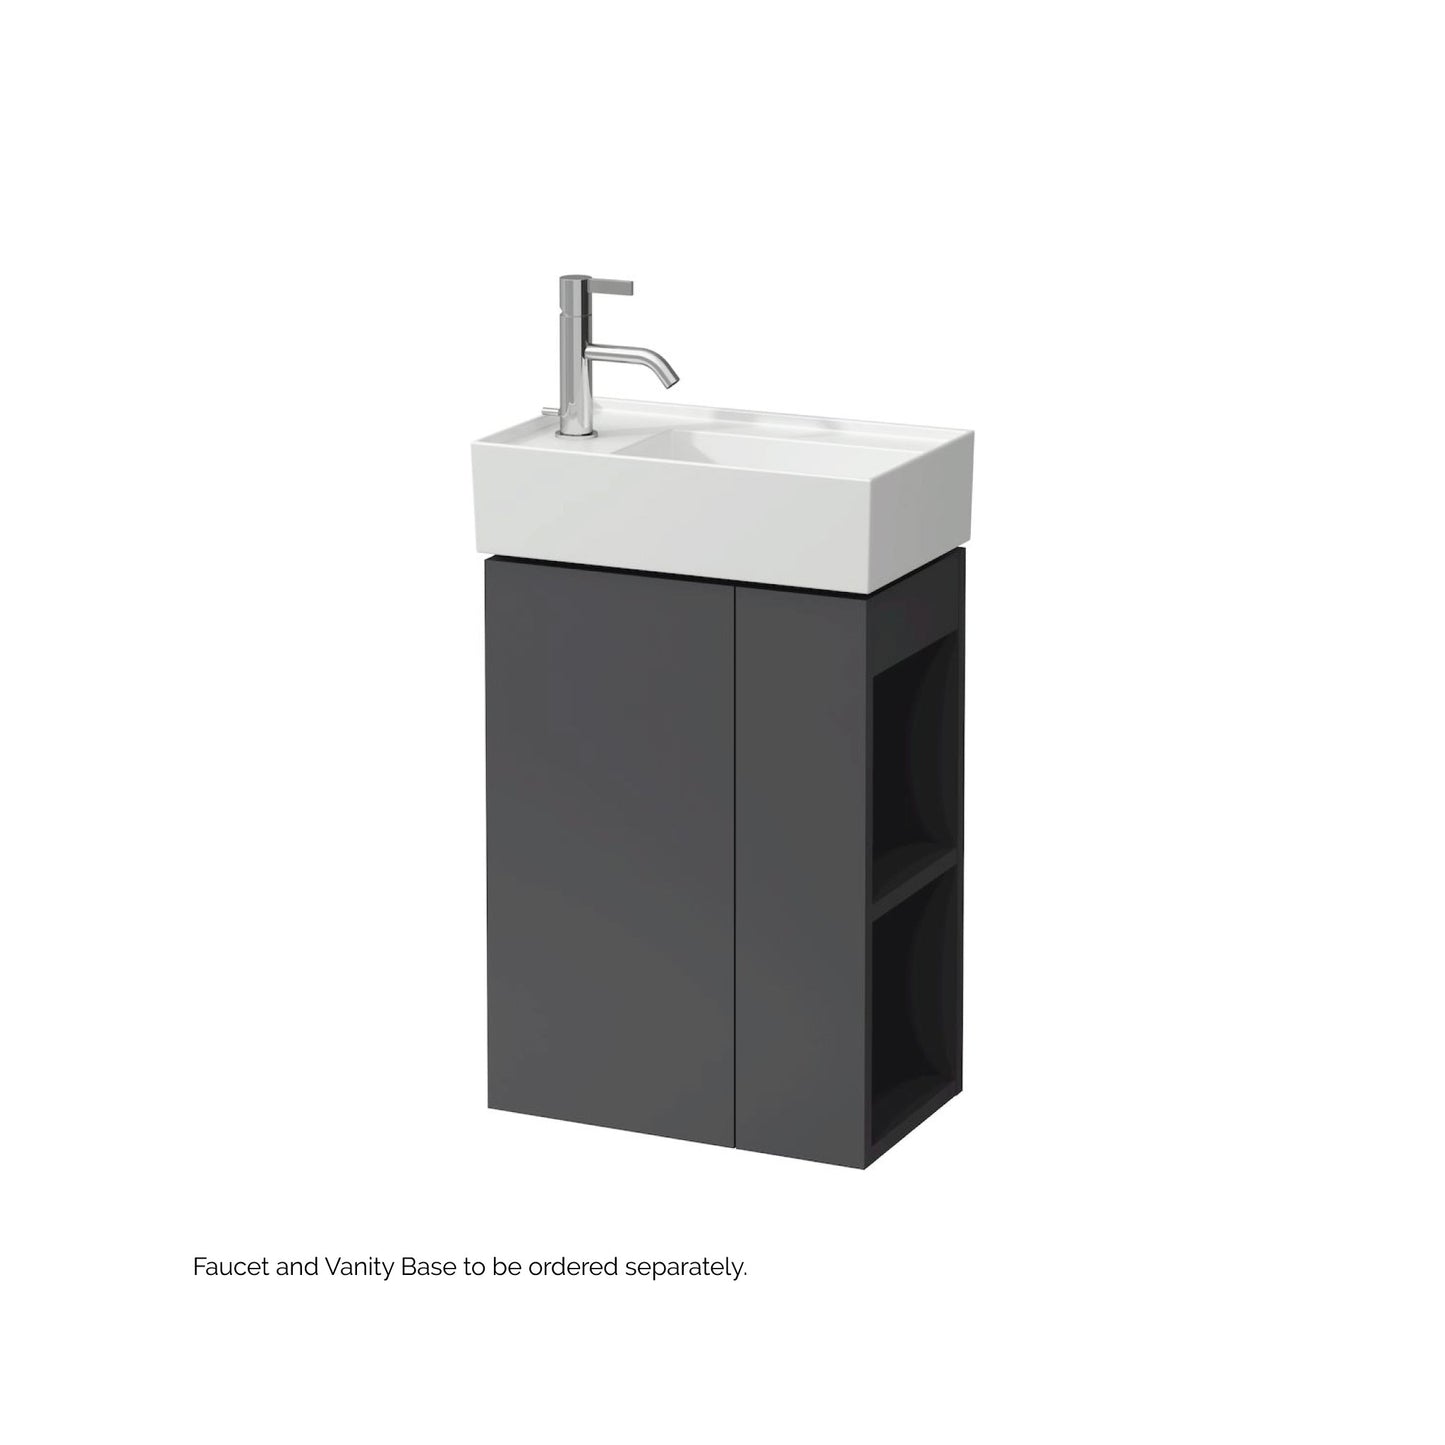 Laufen Kartell 18" x 11" White Wall-Mounted Tap Bank-Left Bathroom Sink With Faucet Hole